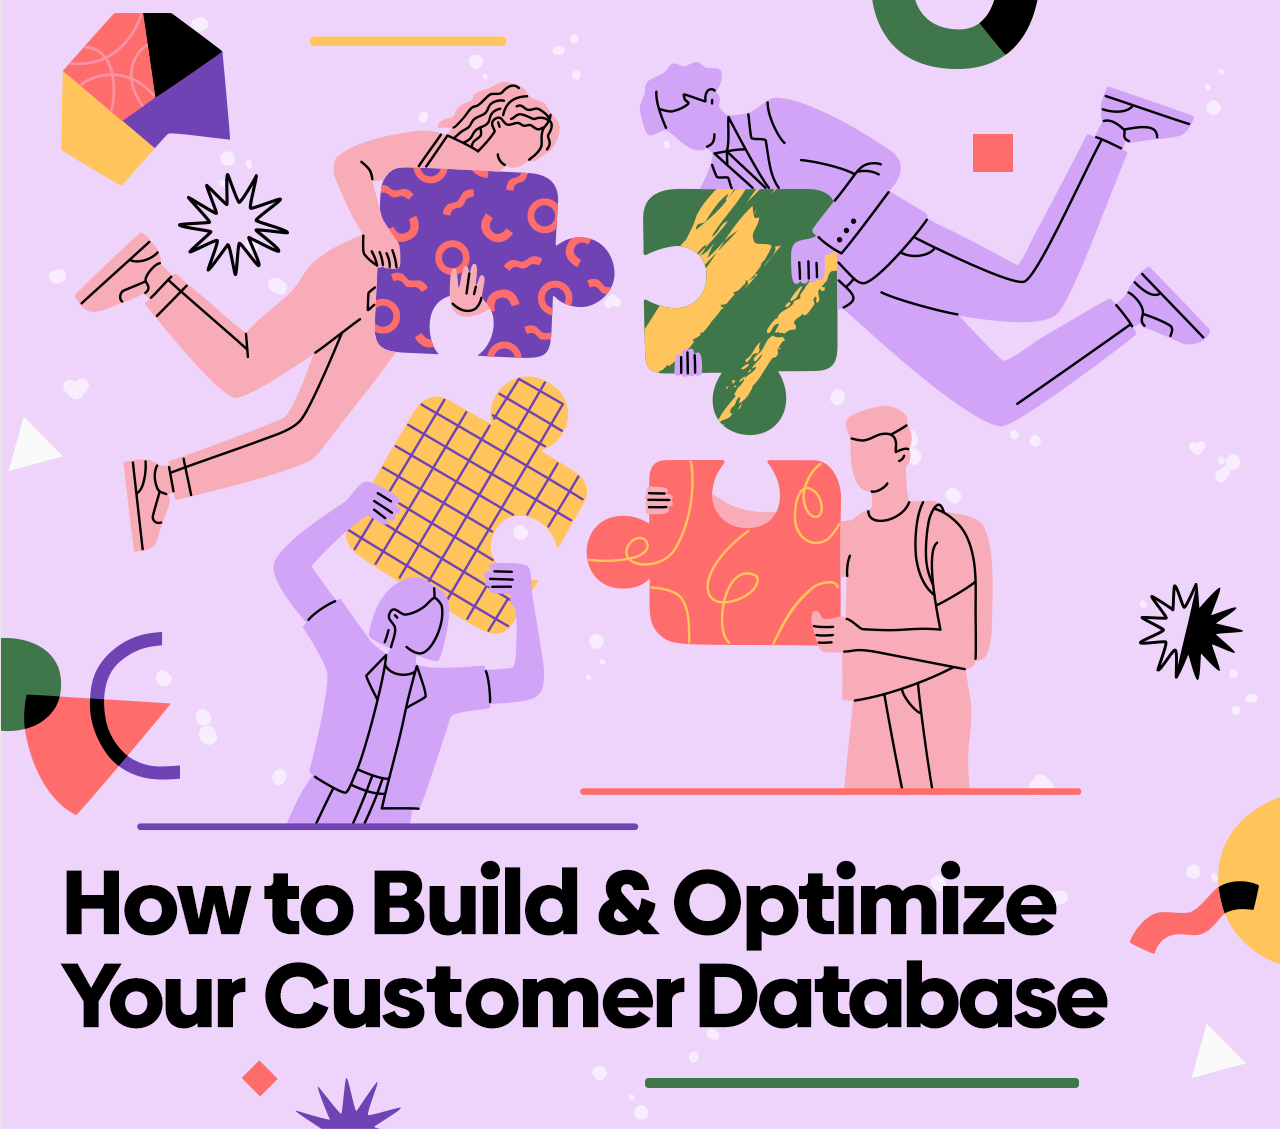 Spark: How to Build & Optimize Your Customer Database